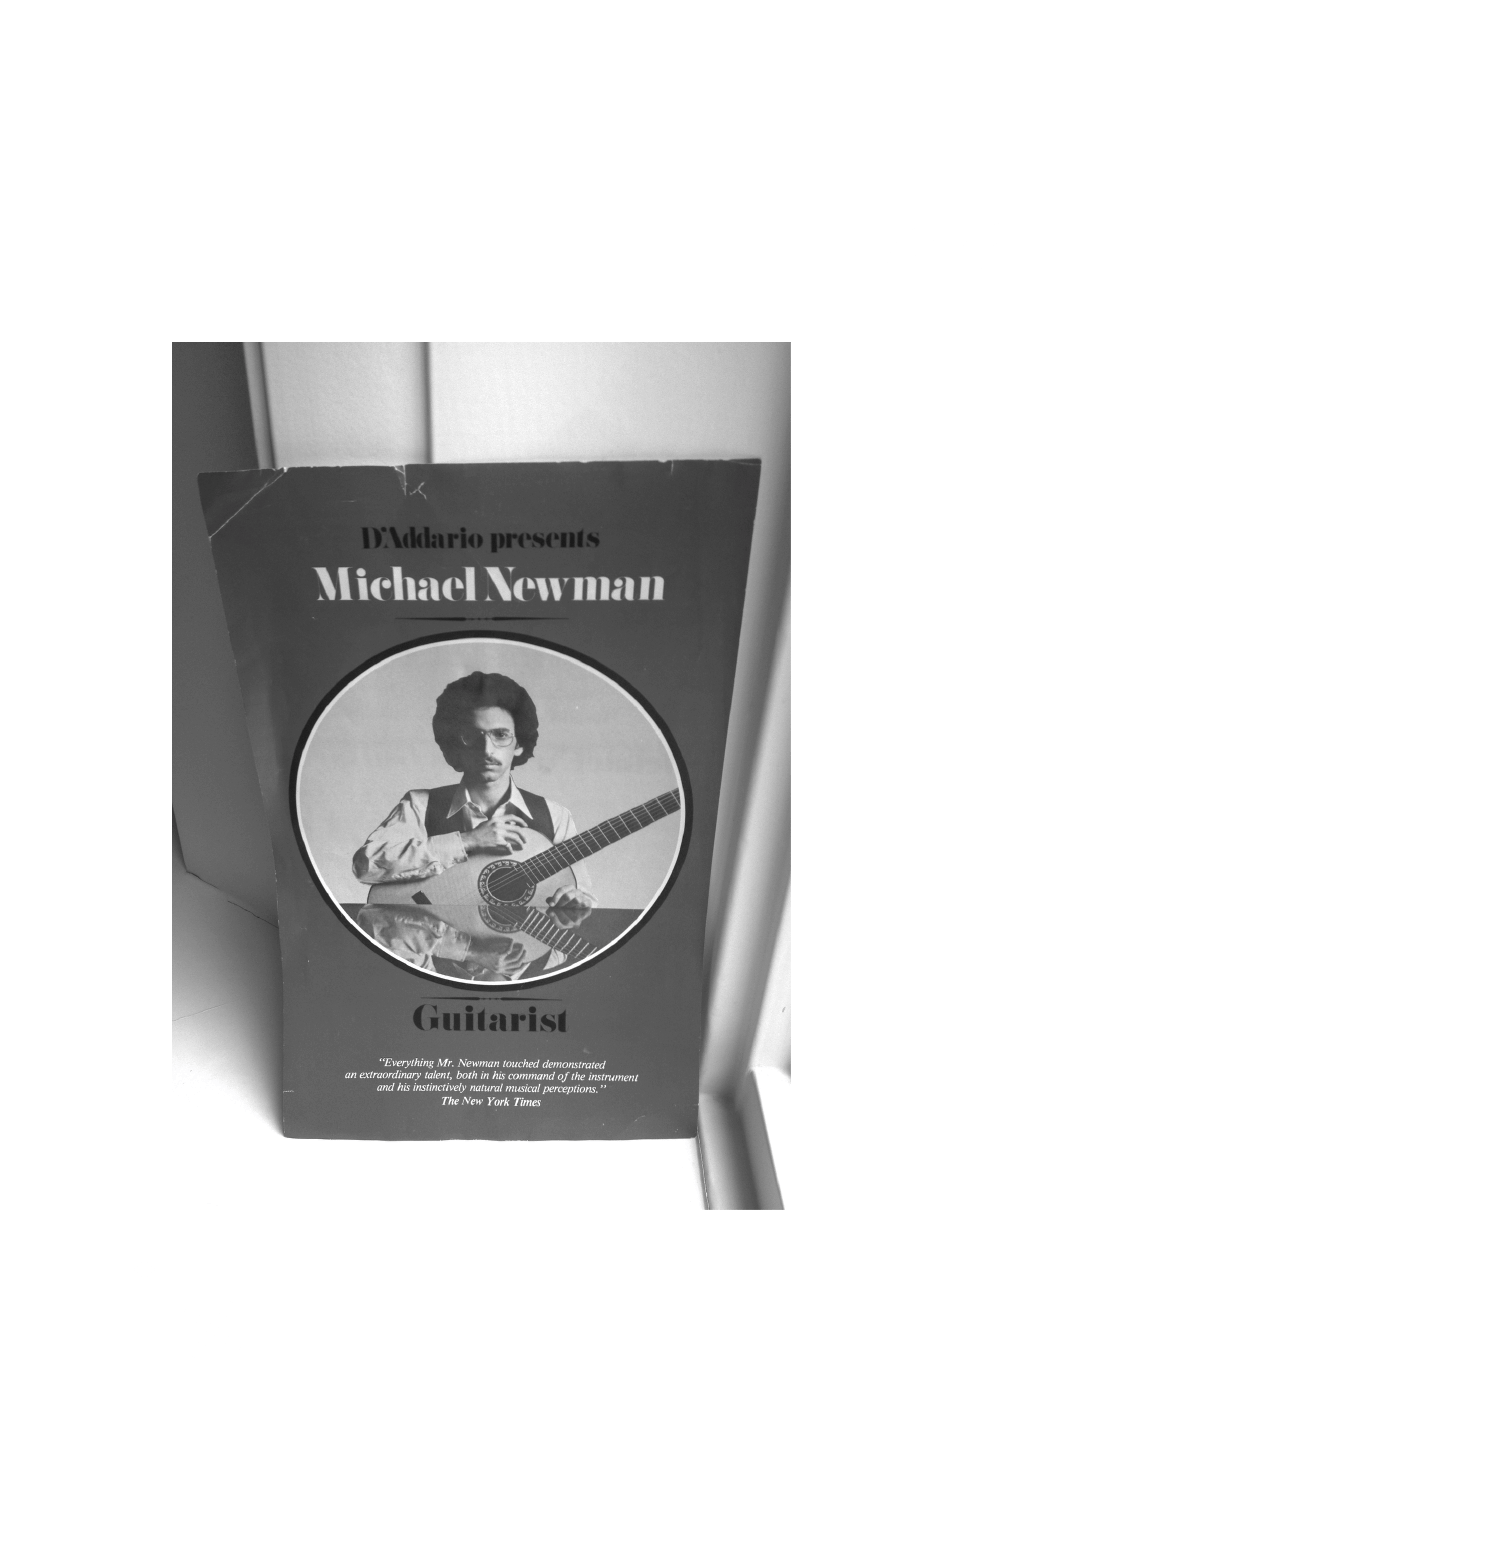 michael newman guitar player poster with quote from Jim Daddario